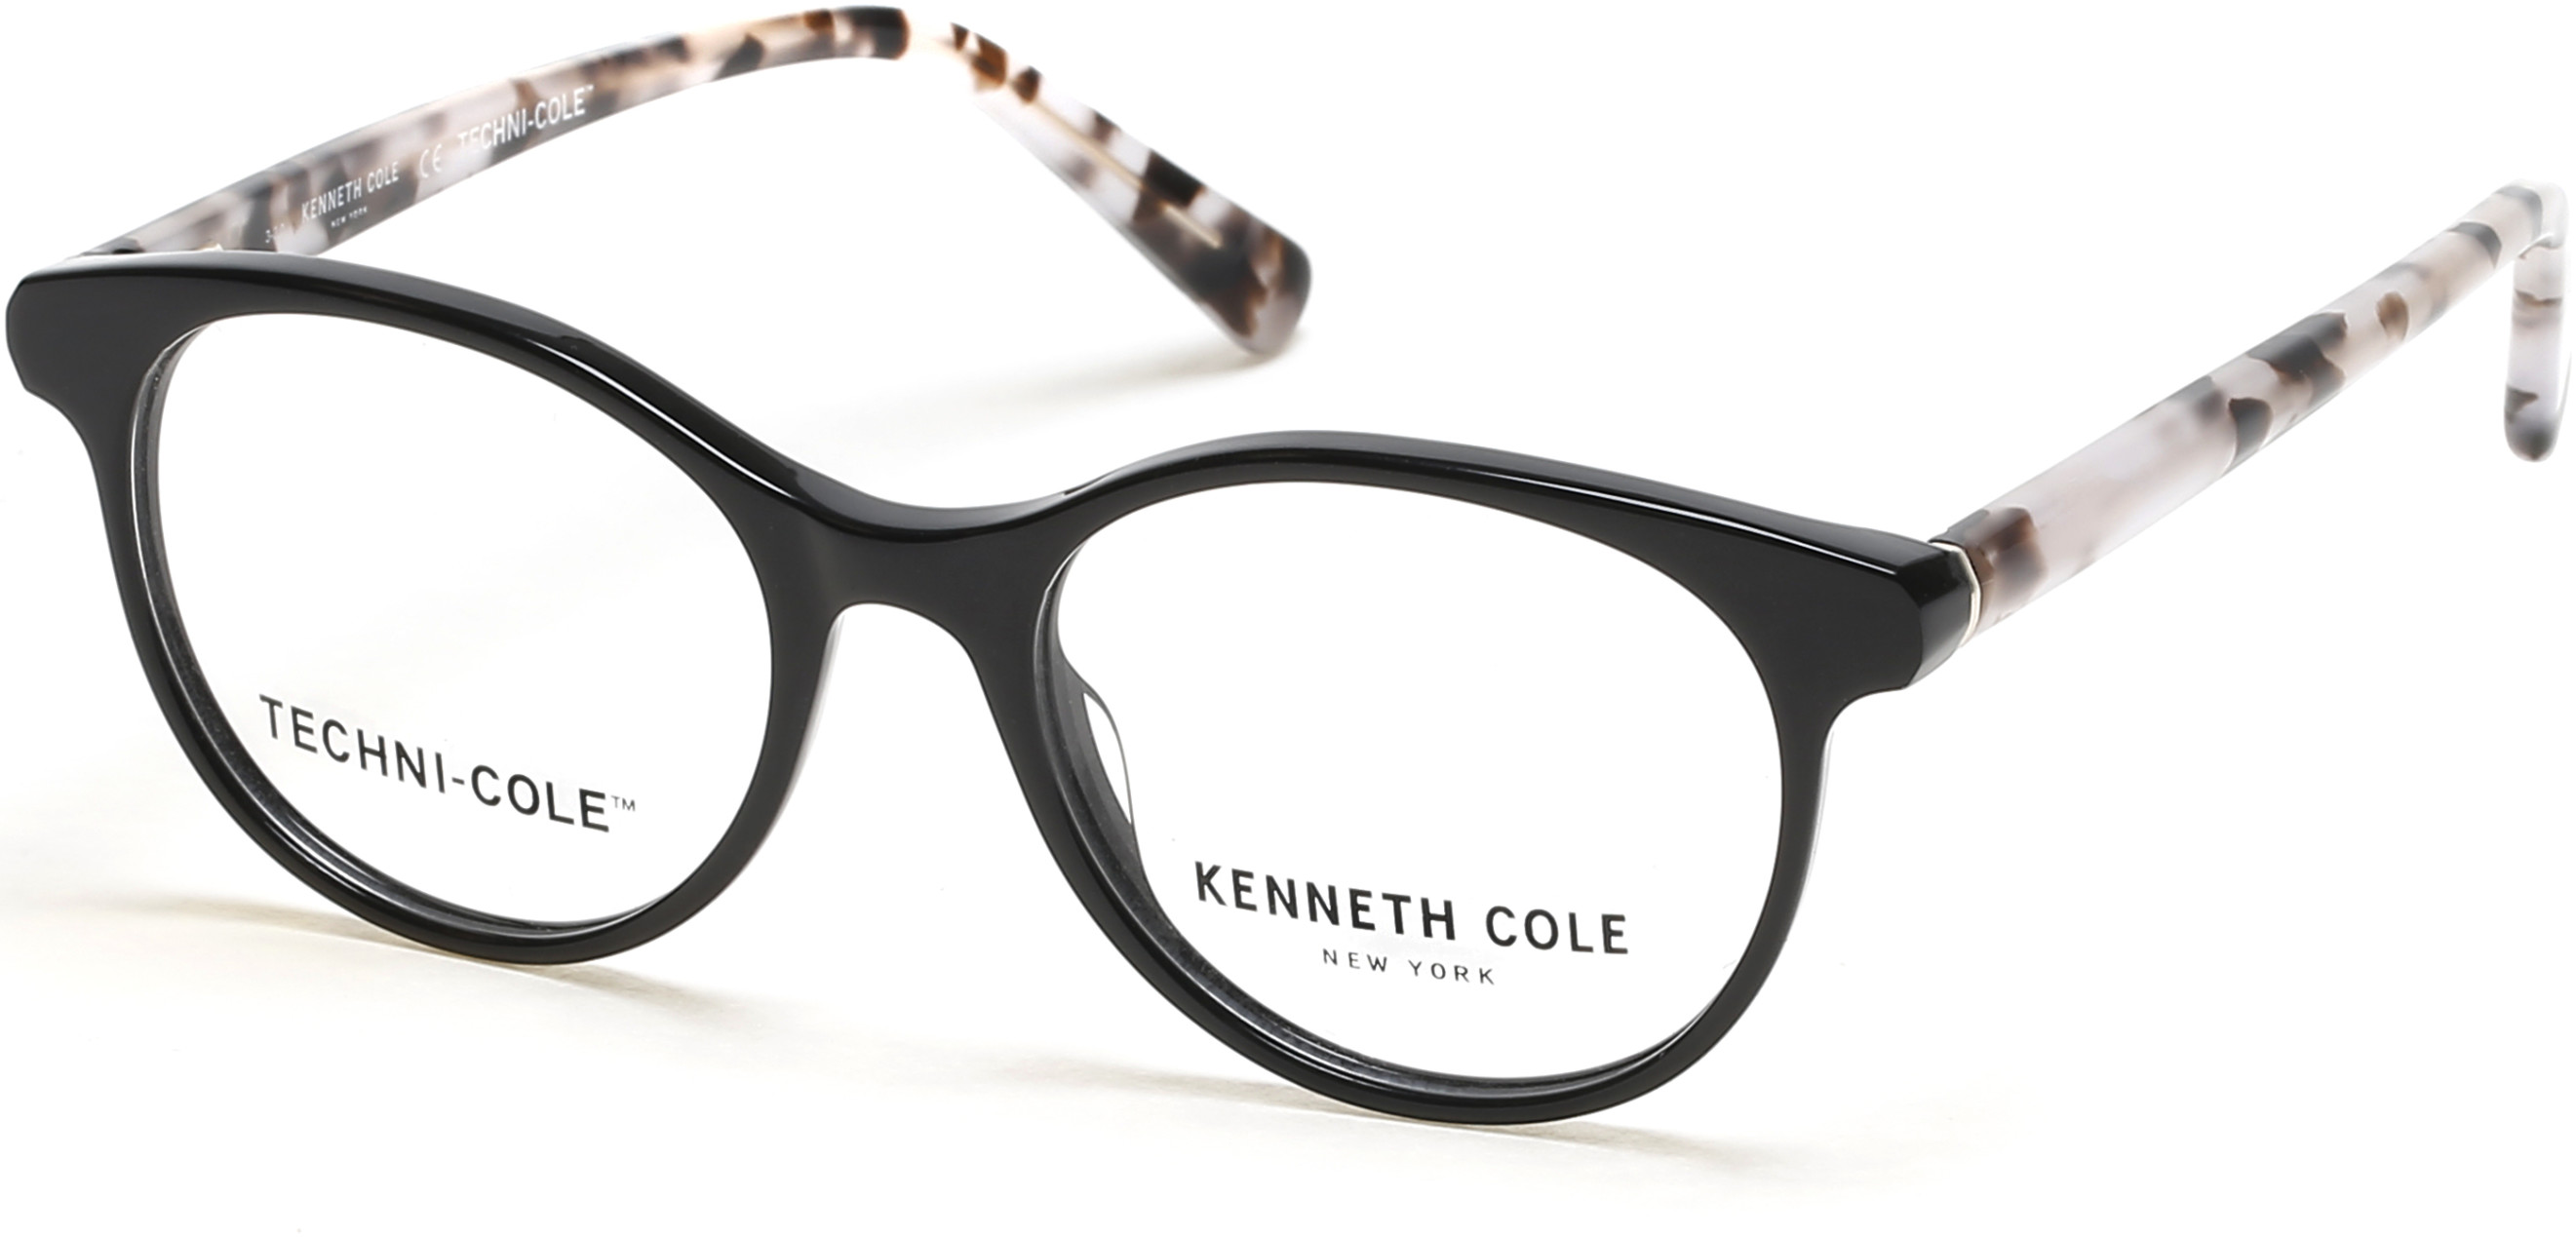 KENNETH COLE NY 0325